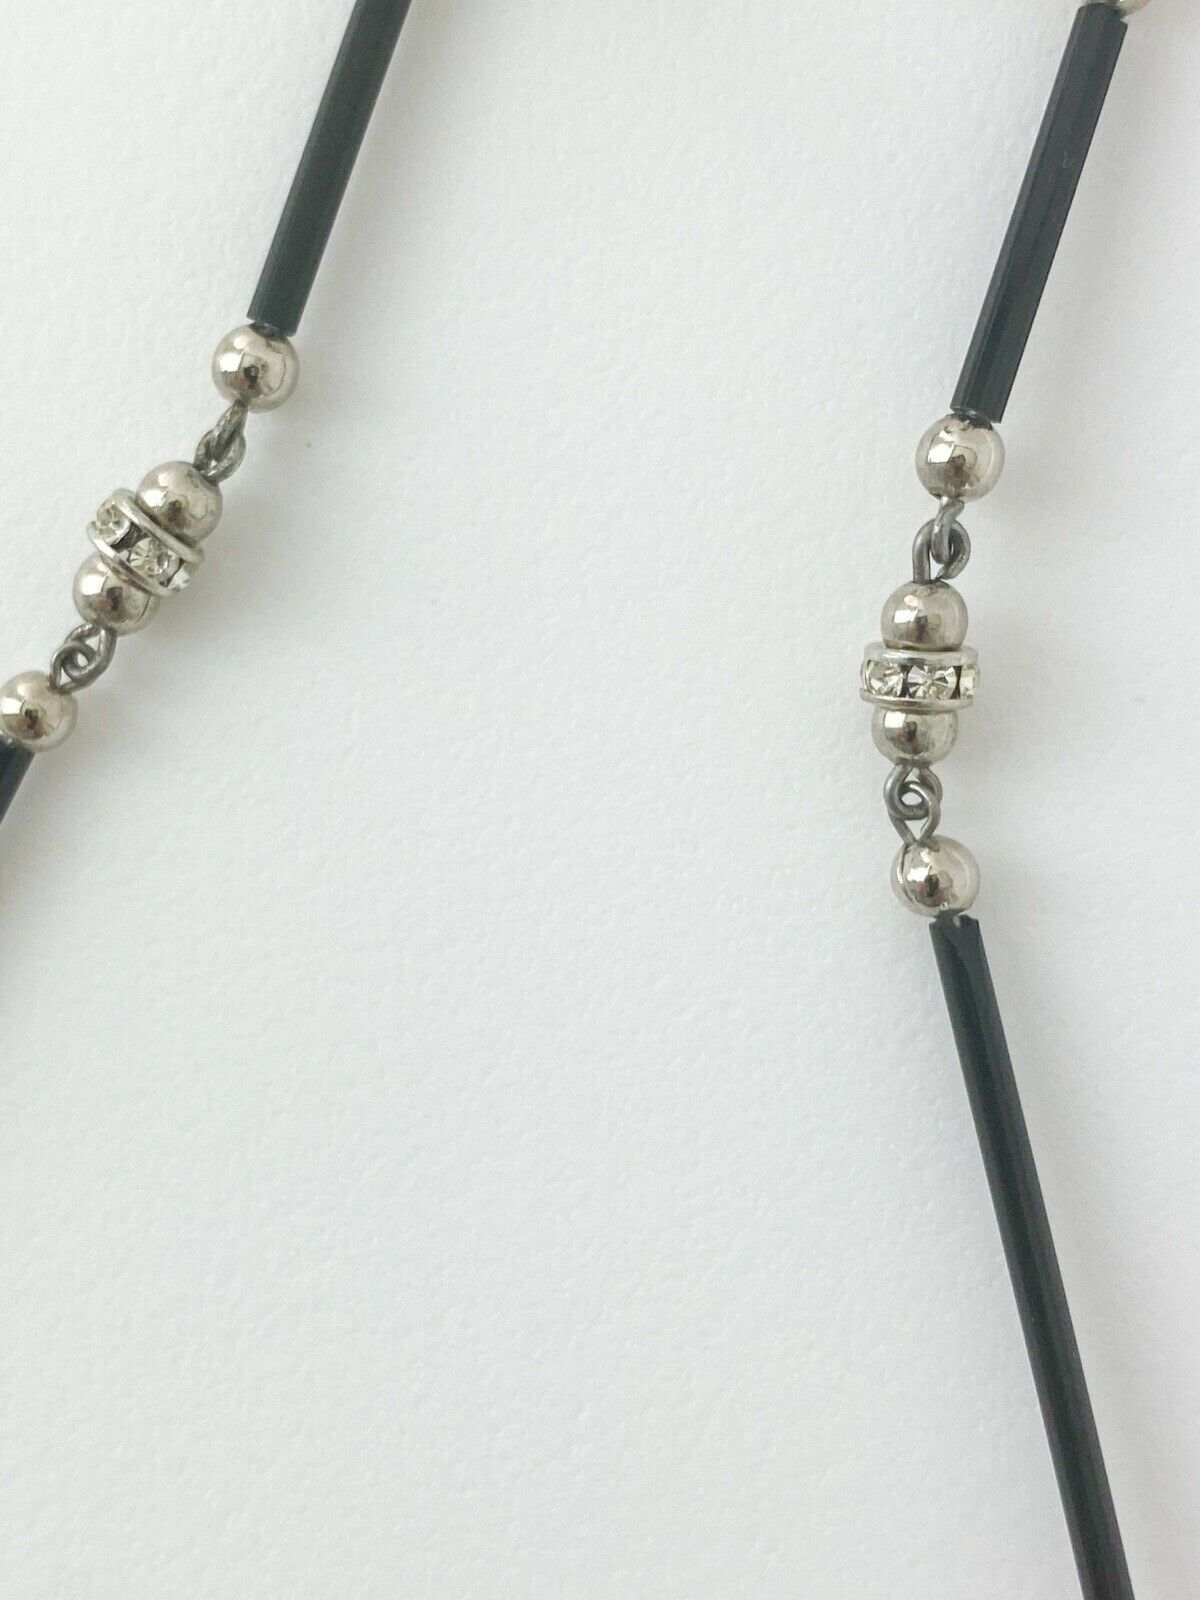 【SOLD OUT】Christian Dior Boutique Long Dangling Earrings Faux Pearls Rhinestones Vintage